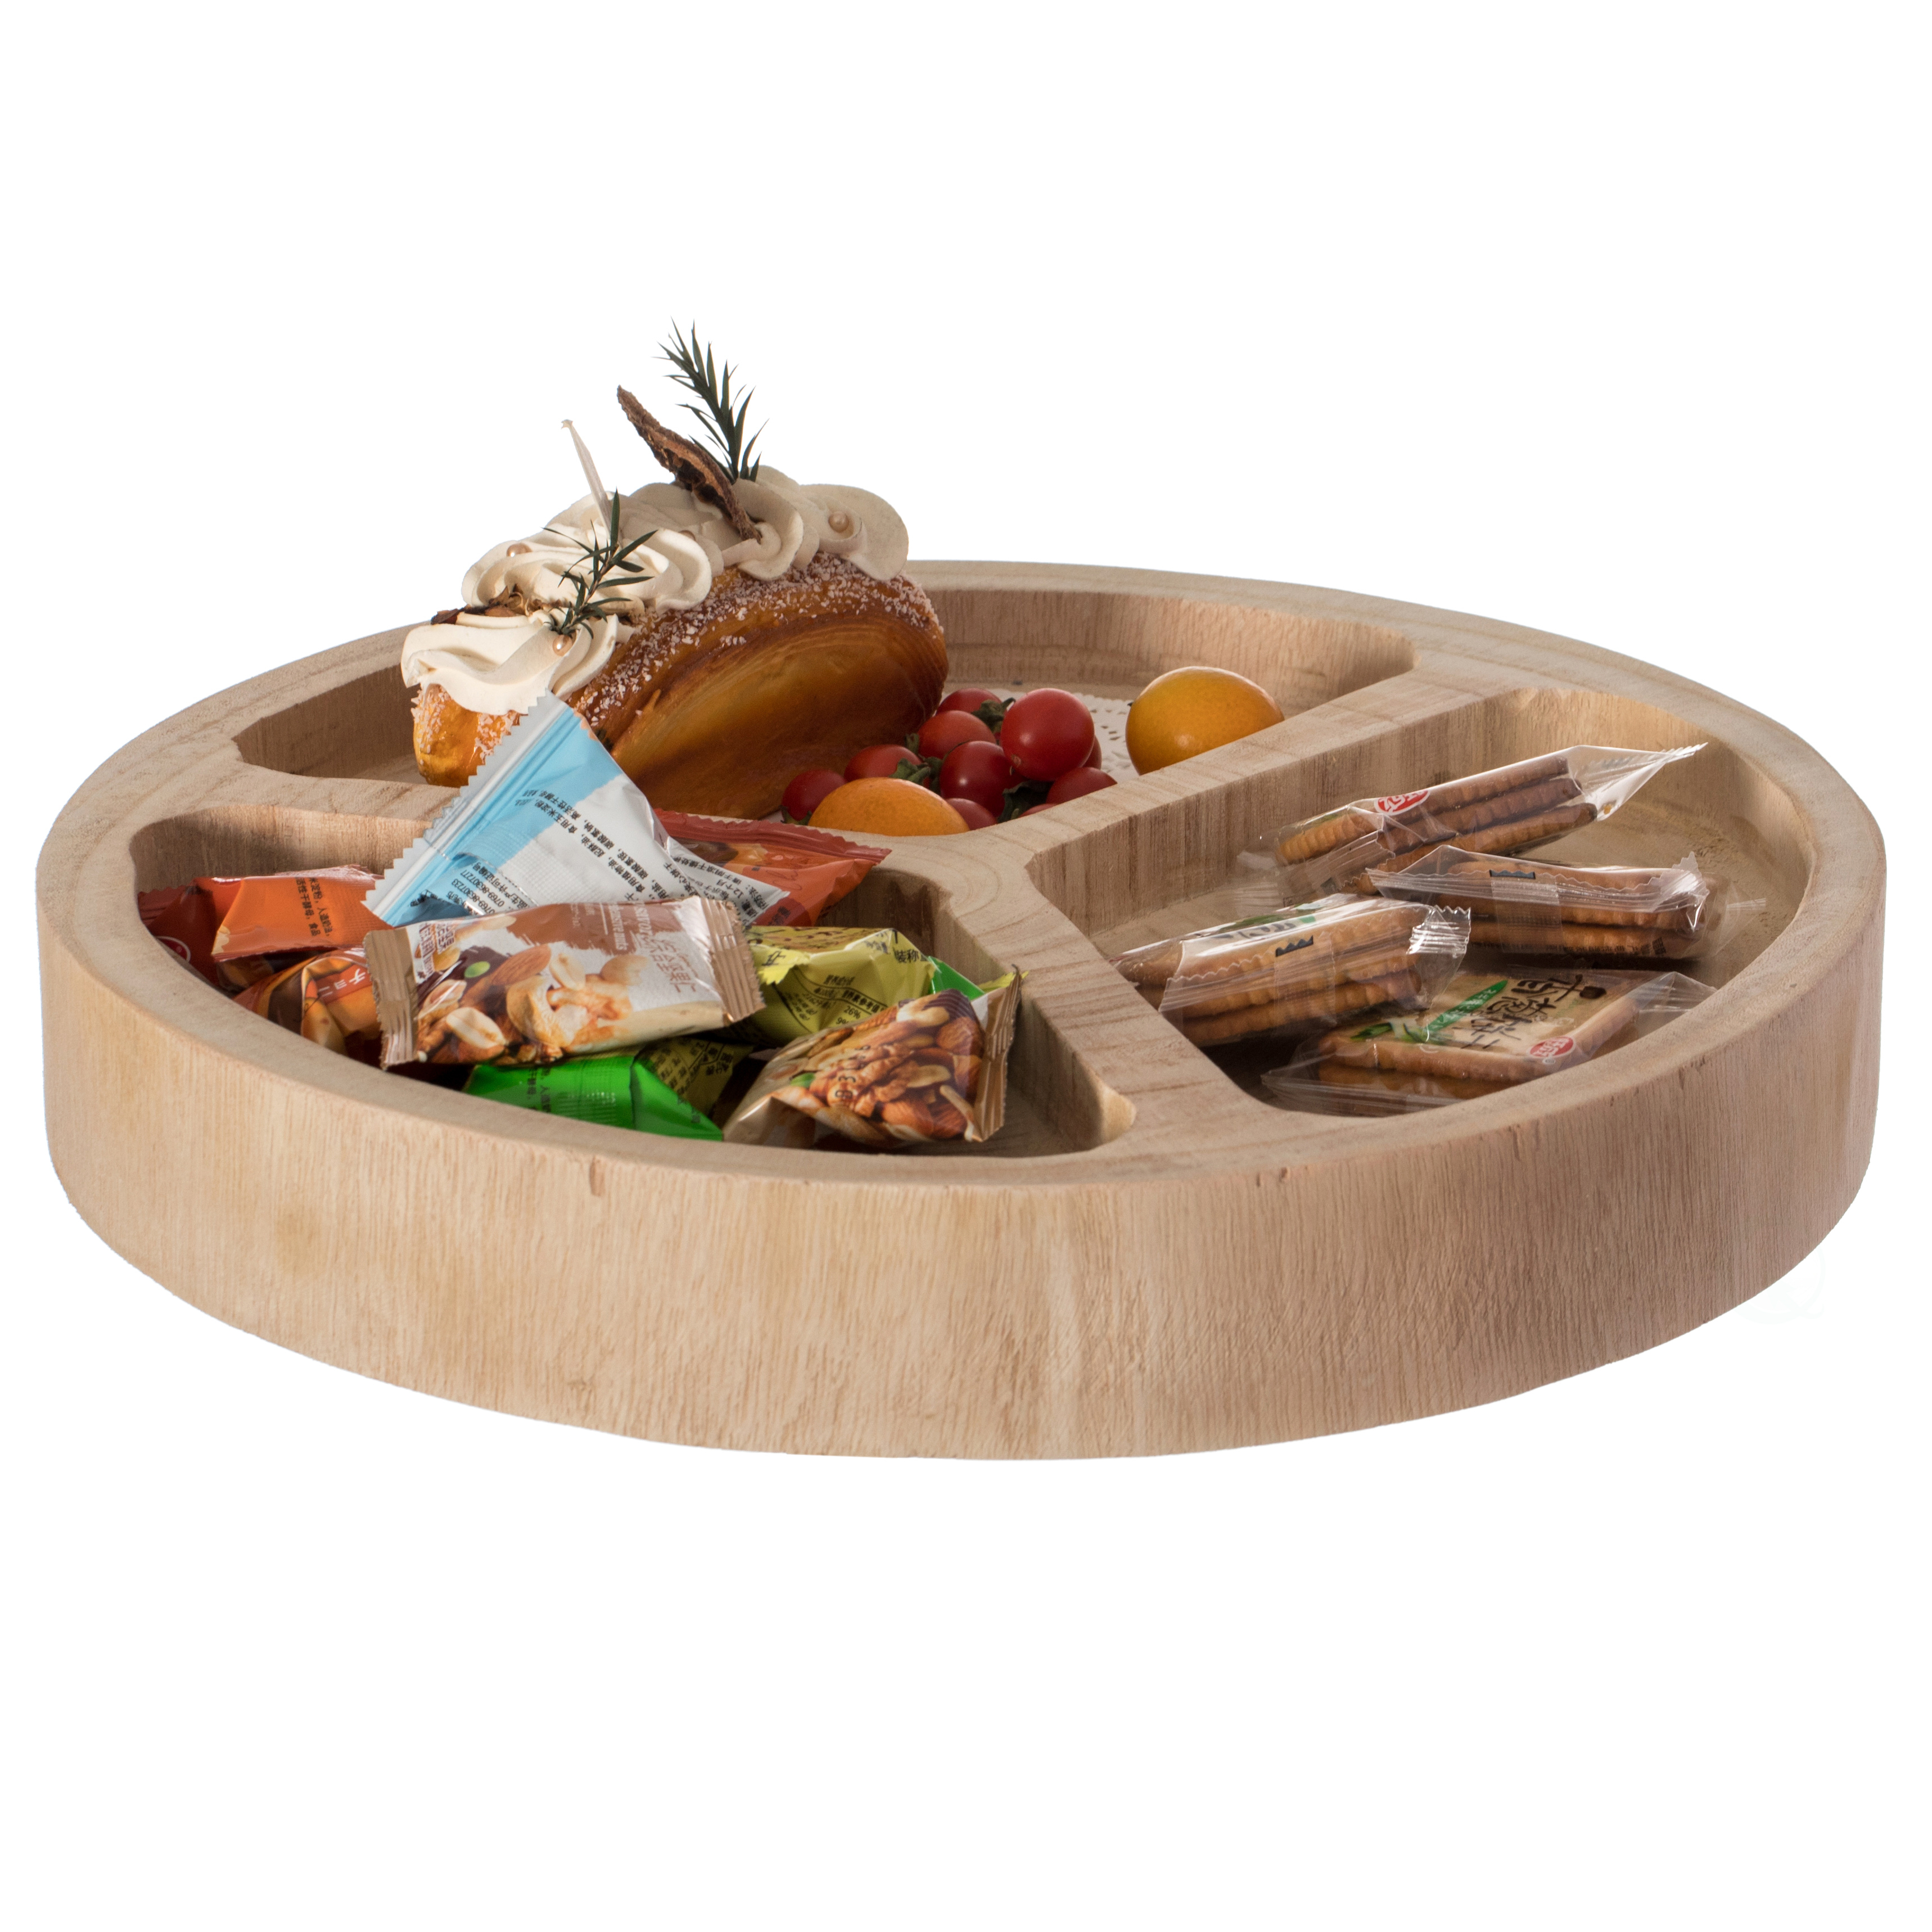 3 Sectional Round Snack Tray For Dining Table And Kitchen Decoration - Natural